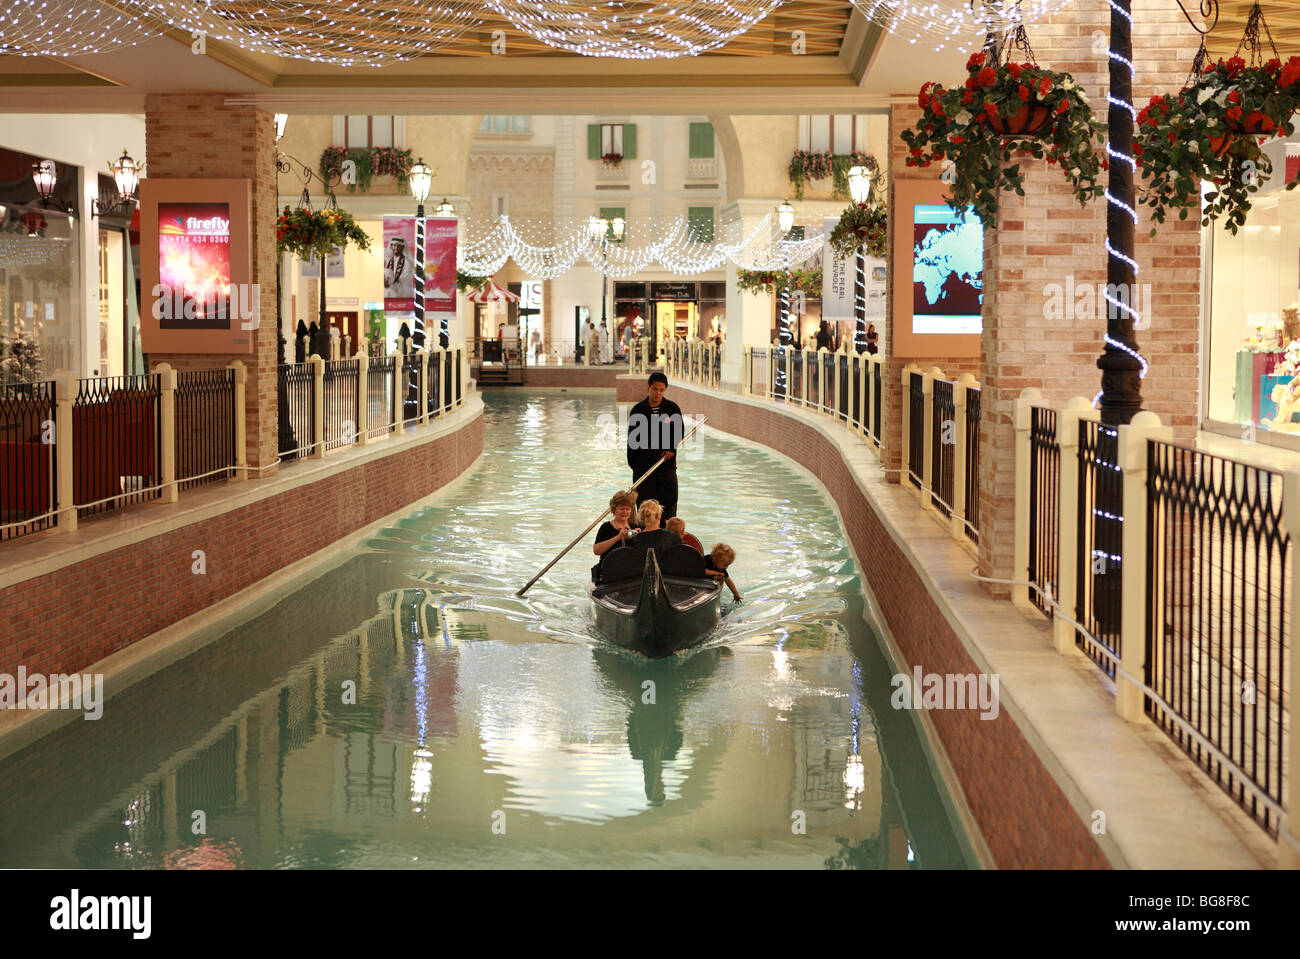 A family enjoy a gondola ride on the artificial river that forms a centrepiece of the Villagio shopping mall in Doha, Qatar Stock Photo